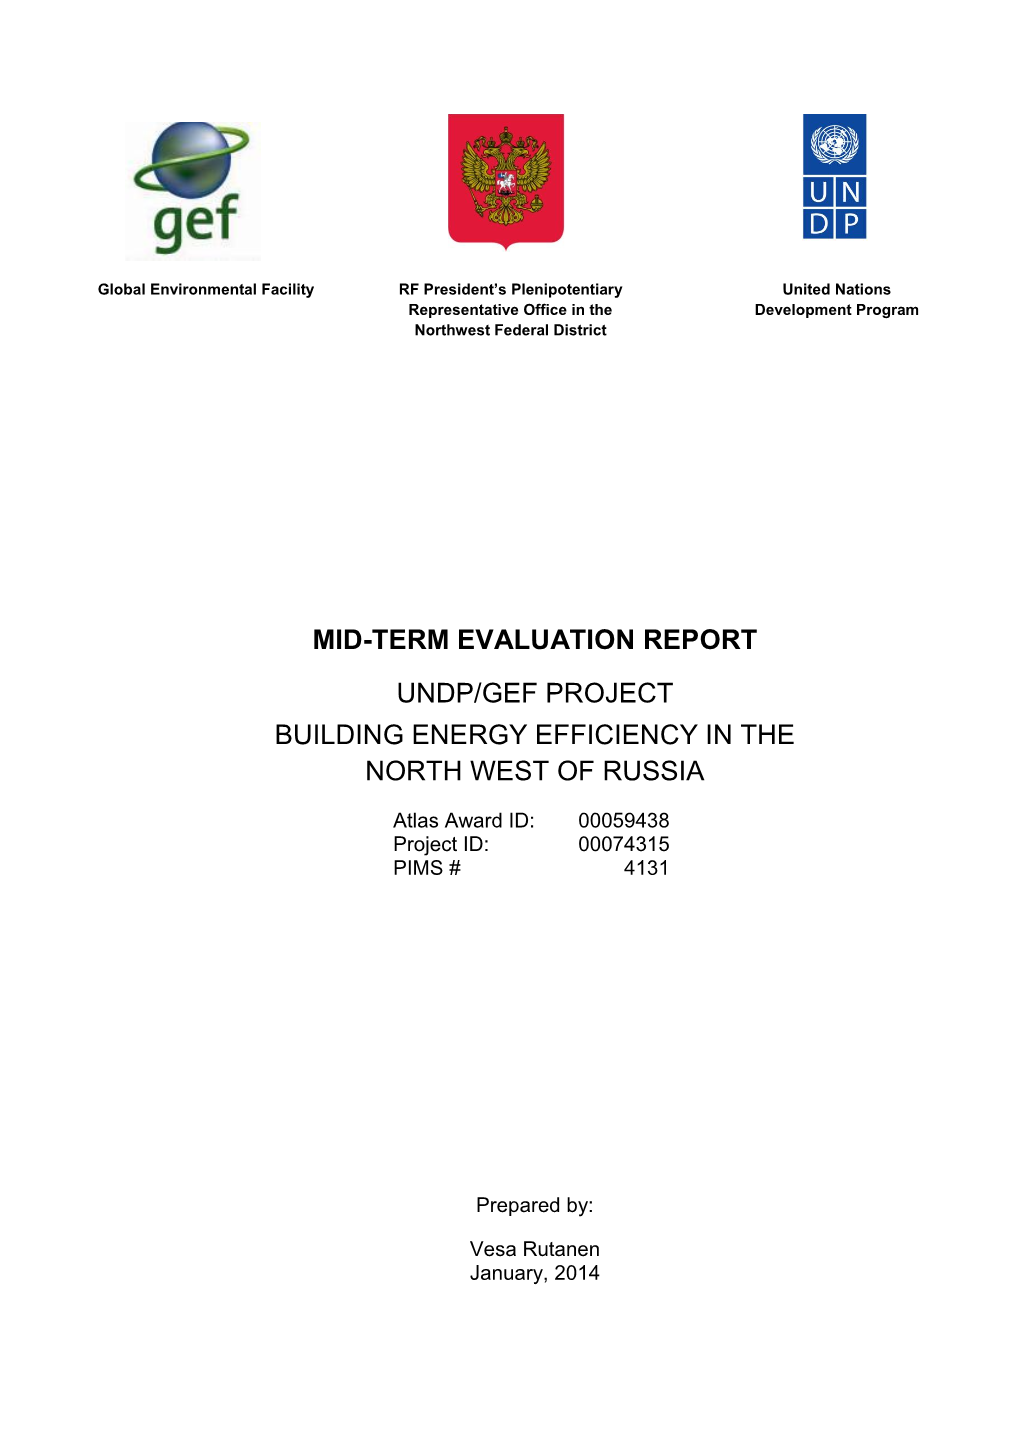 Mid-Term Evaluation Report Undp/Gef Project Building Energy Efficiency in the North West of Russia